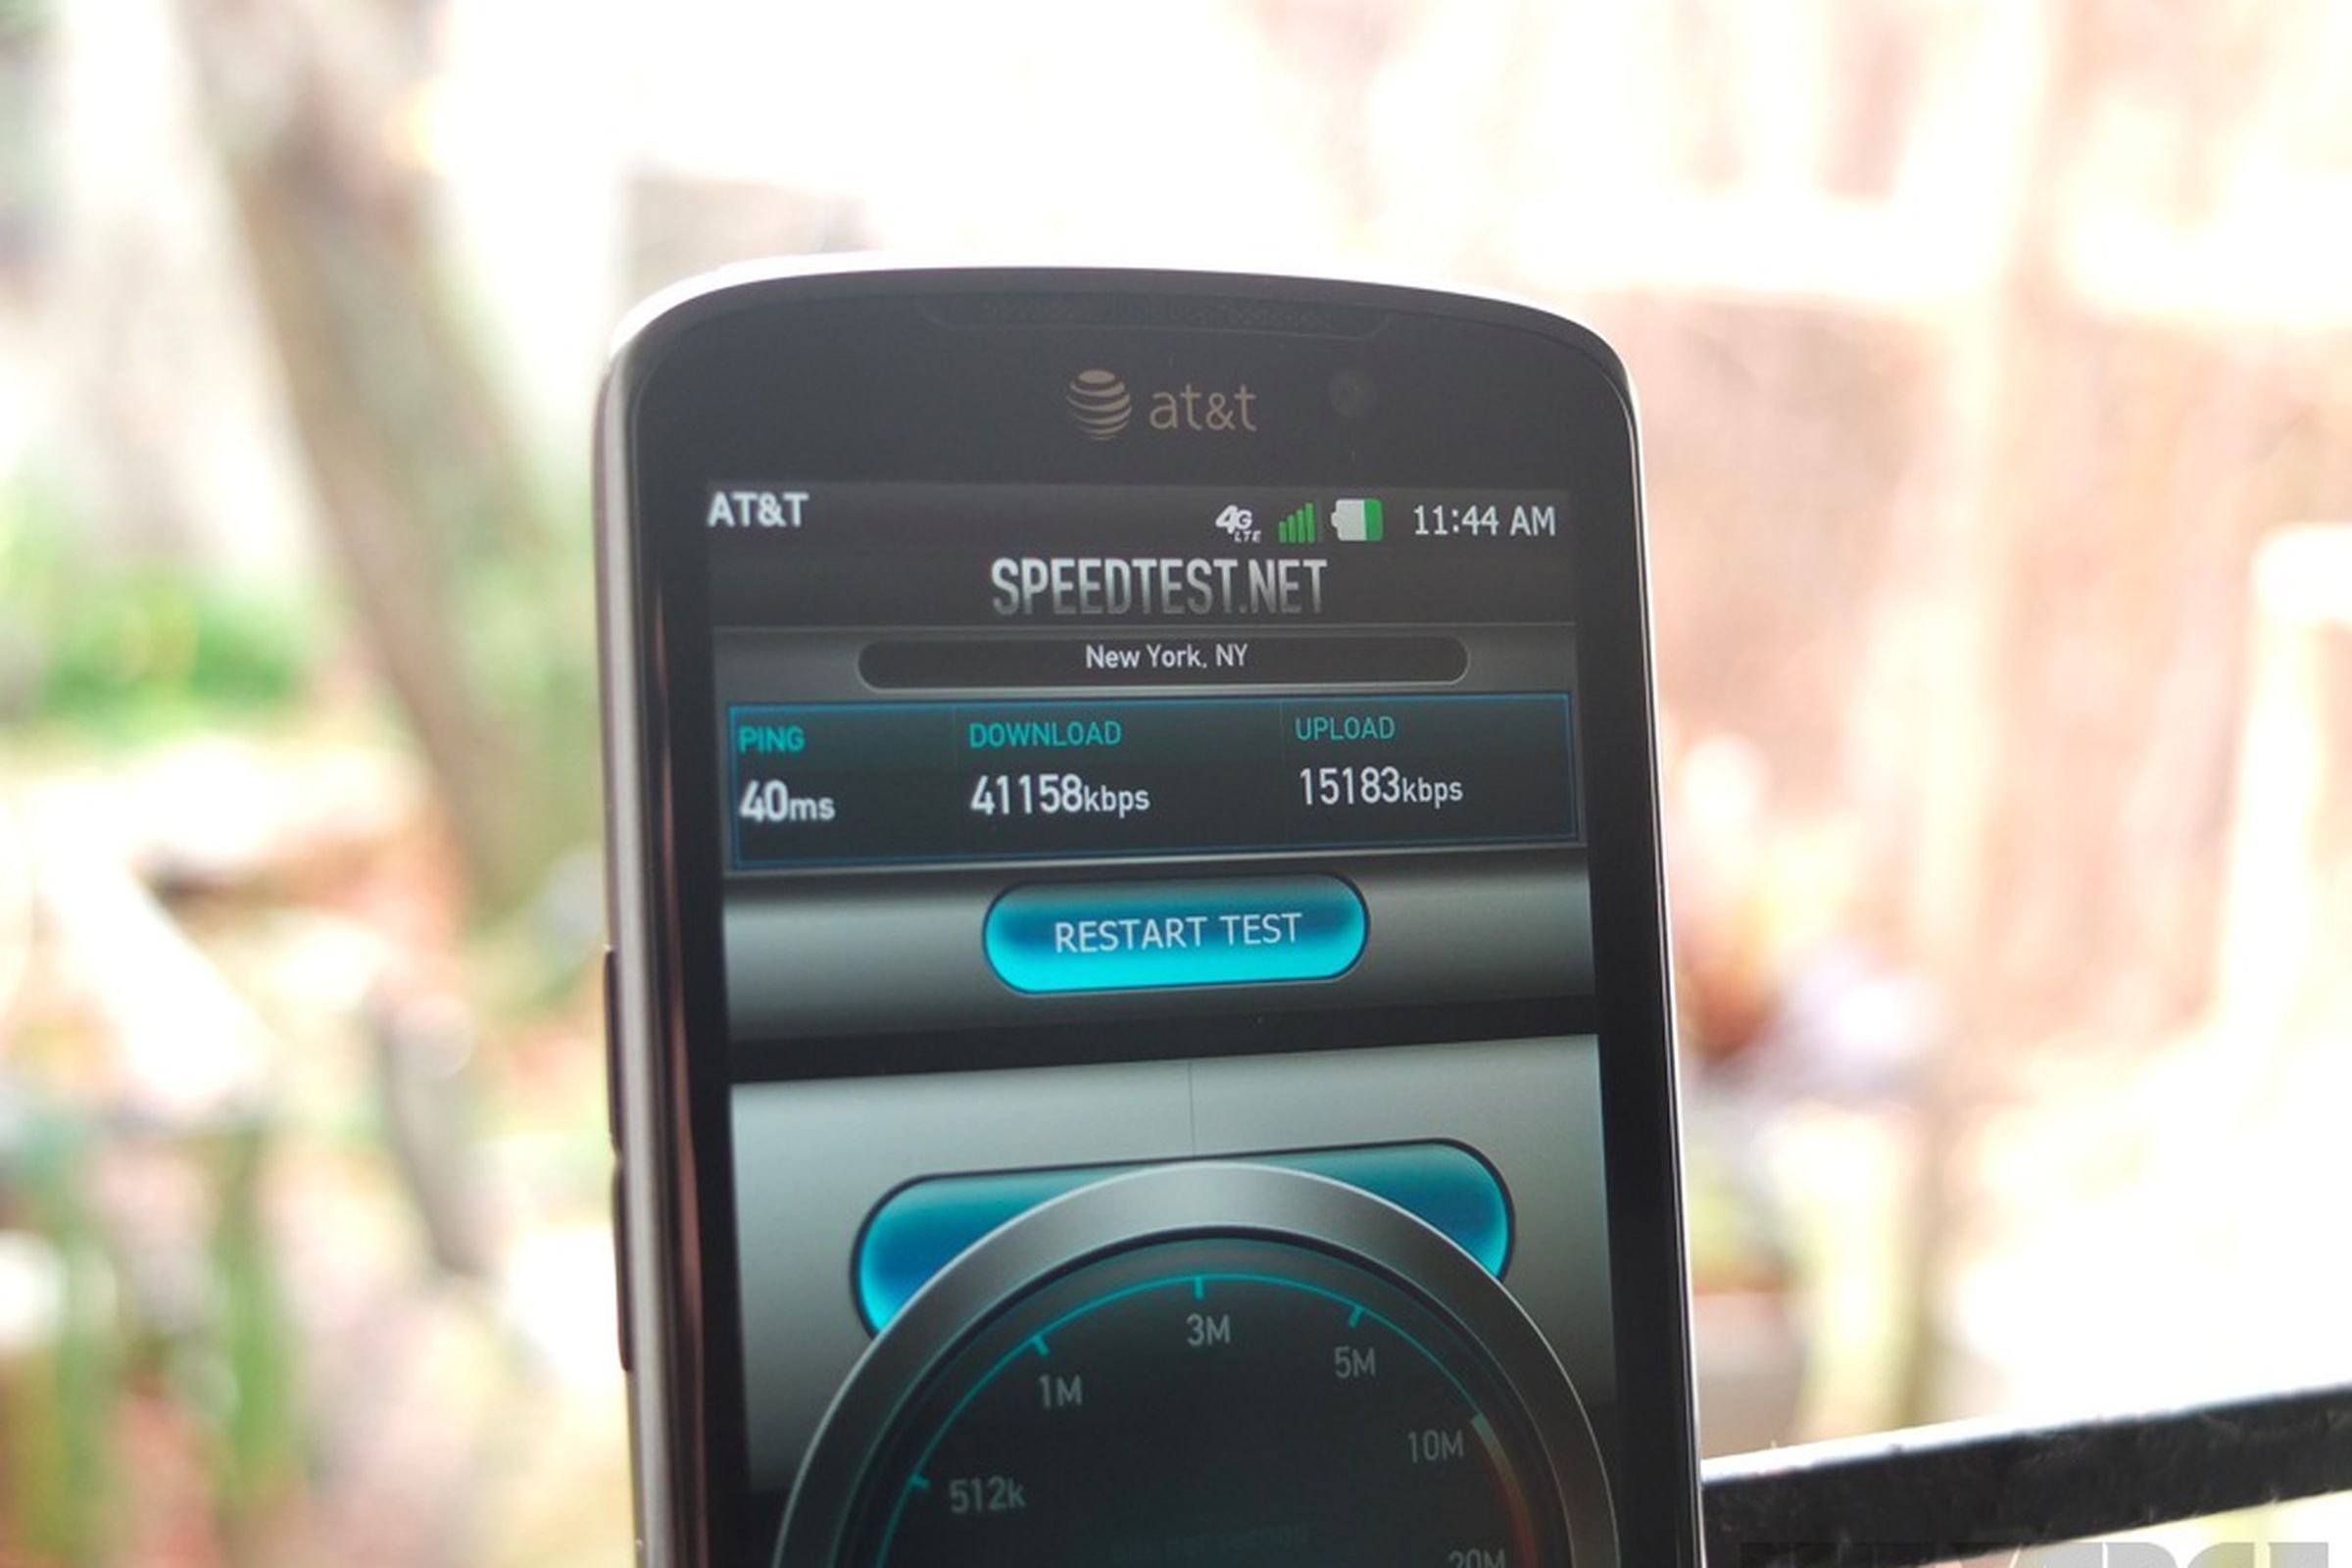 AT&T 4G LTE